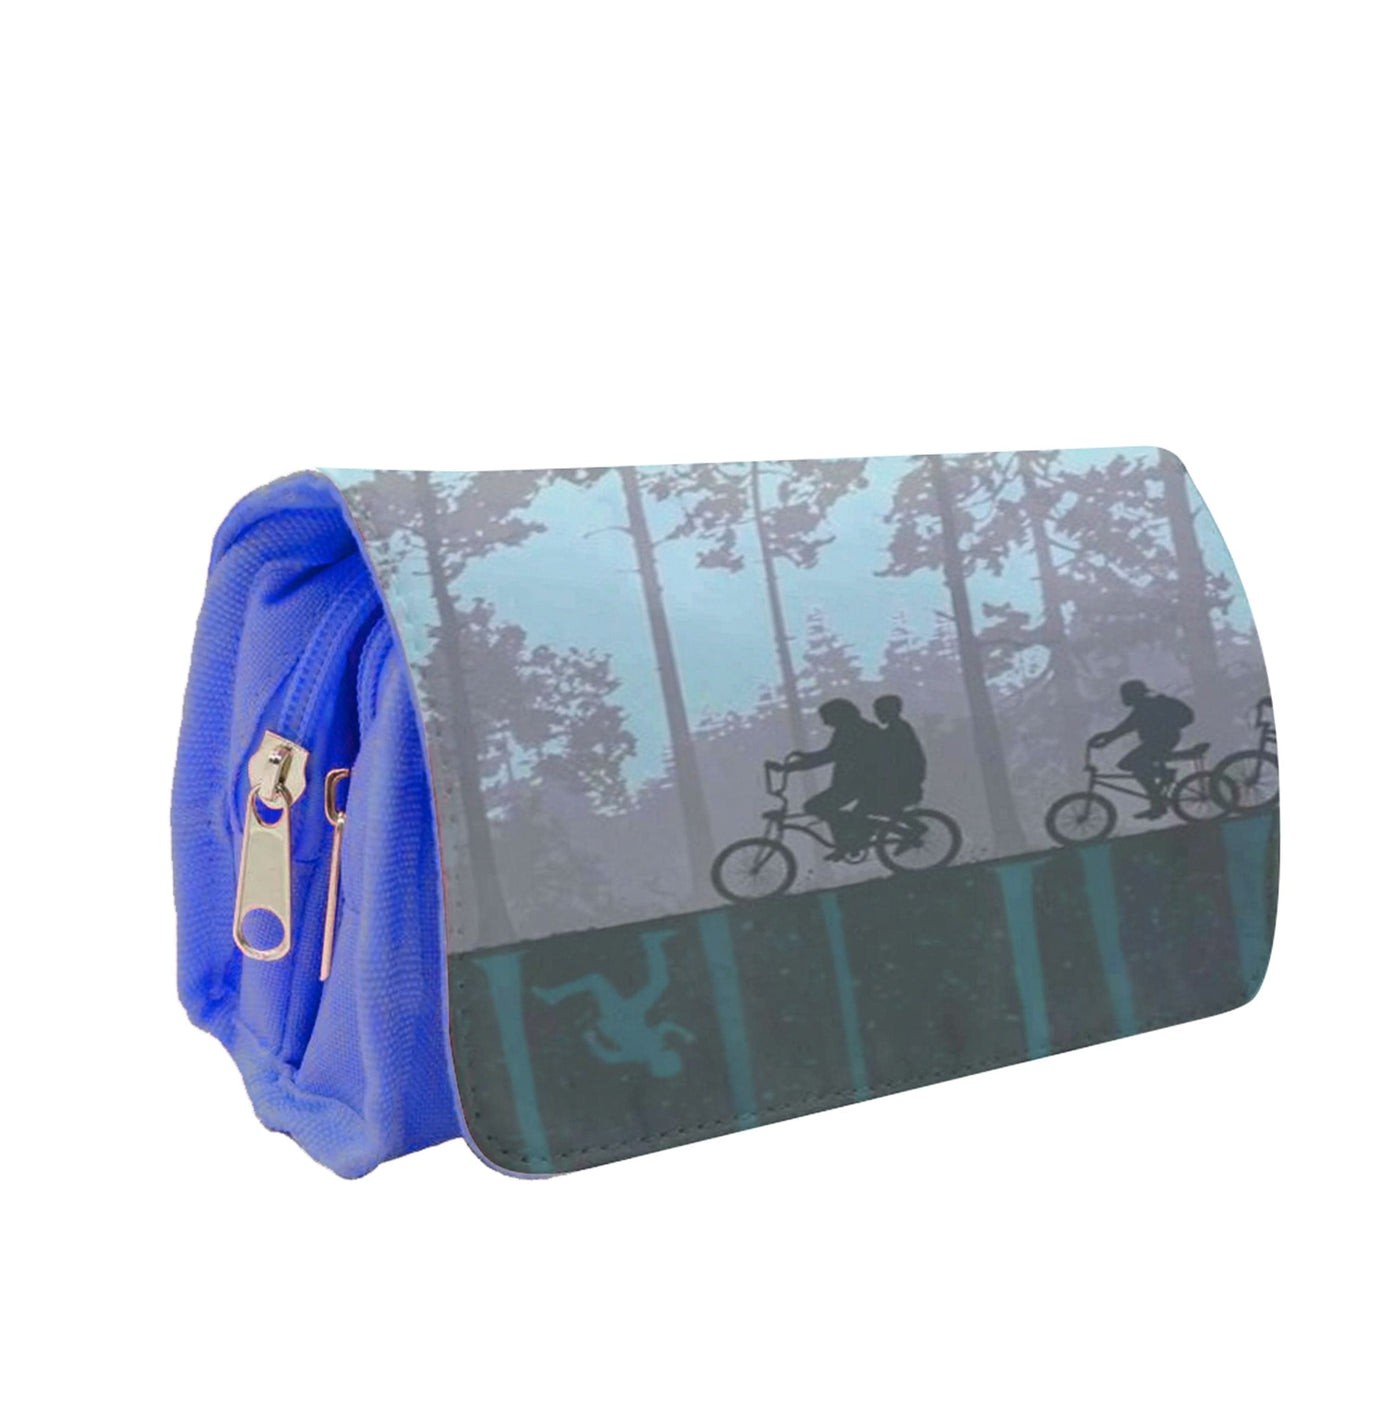 World of Upside Down - Stranger Things Pencil Case